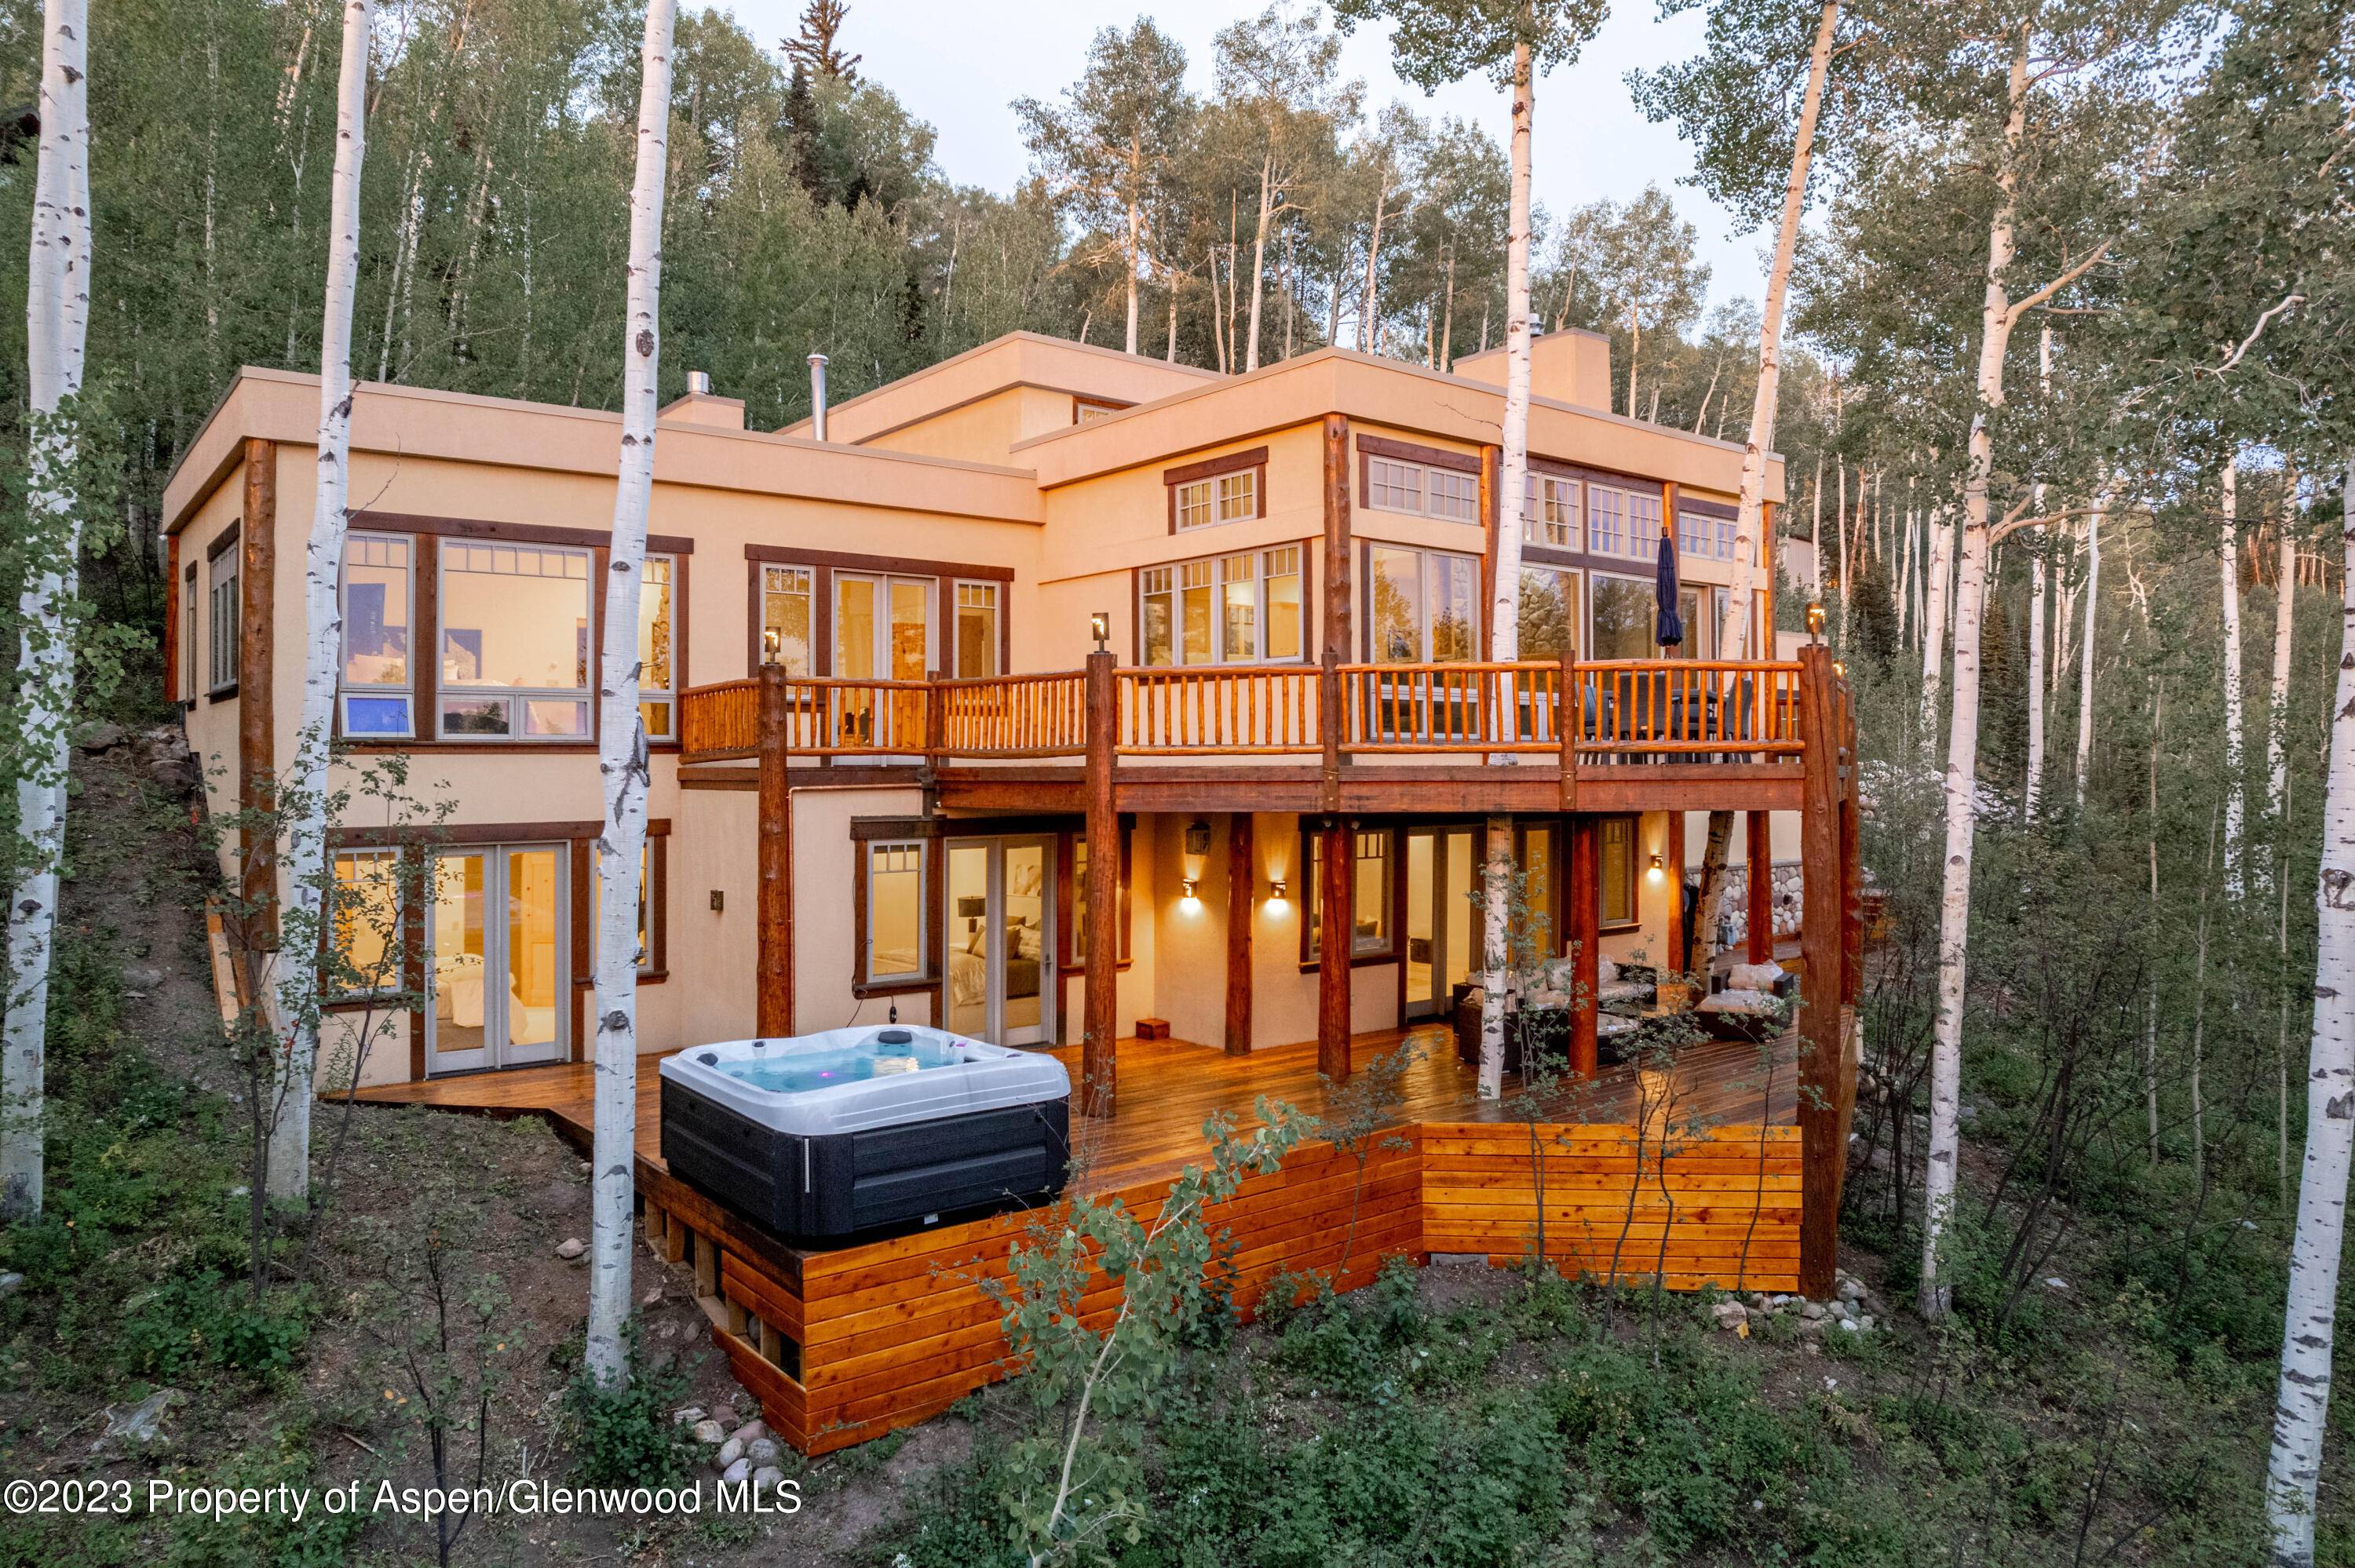 This four bedroom spacious home sits perched on Maple Ridge Lane offering views of Snowmass Village and the Roaring Fork Valley.